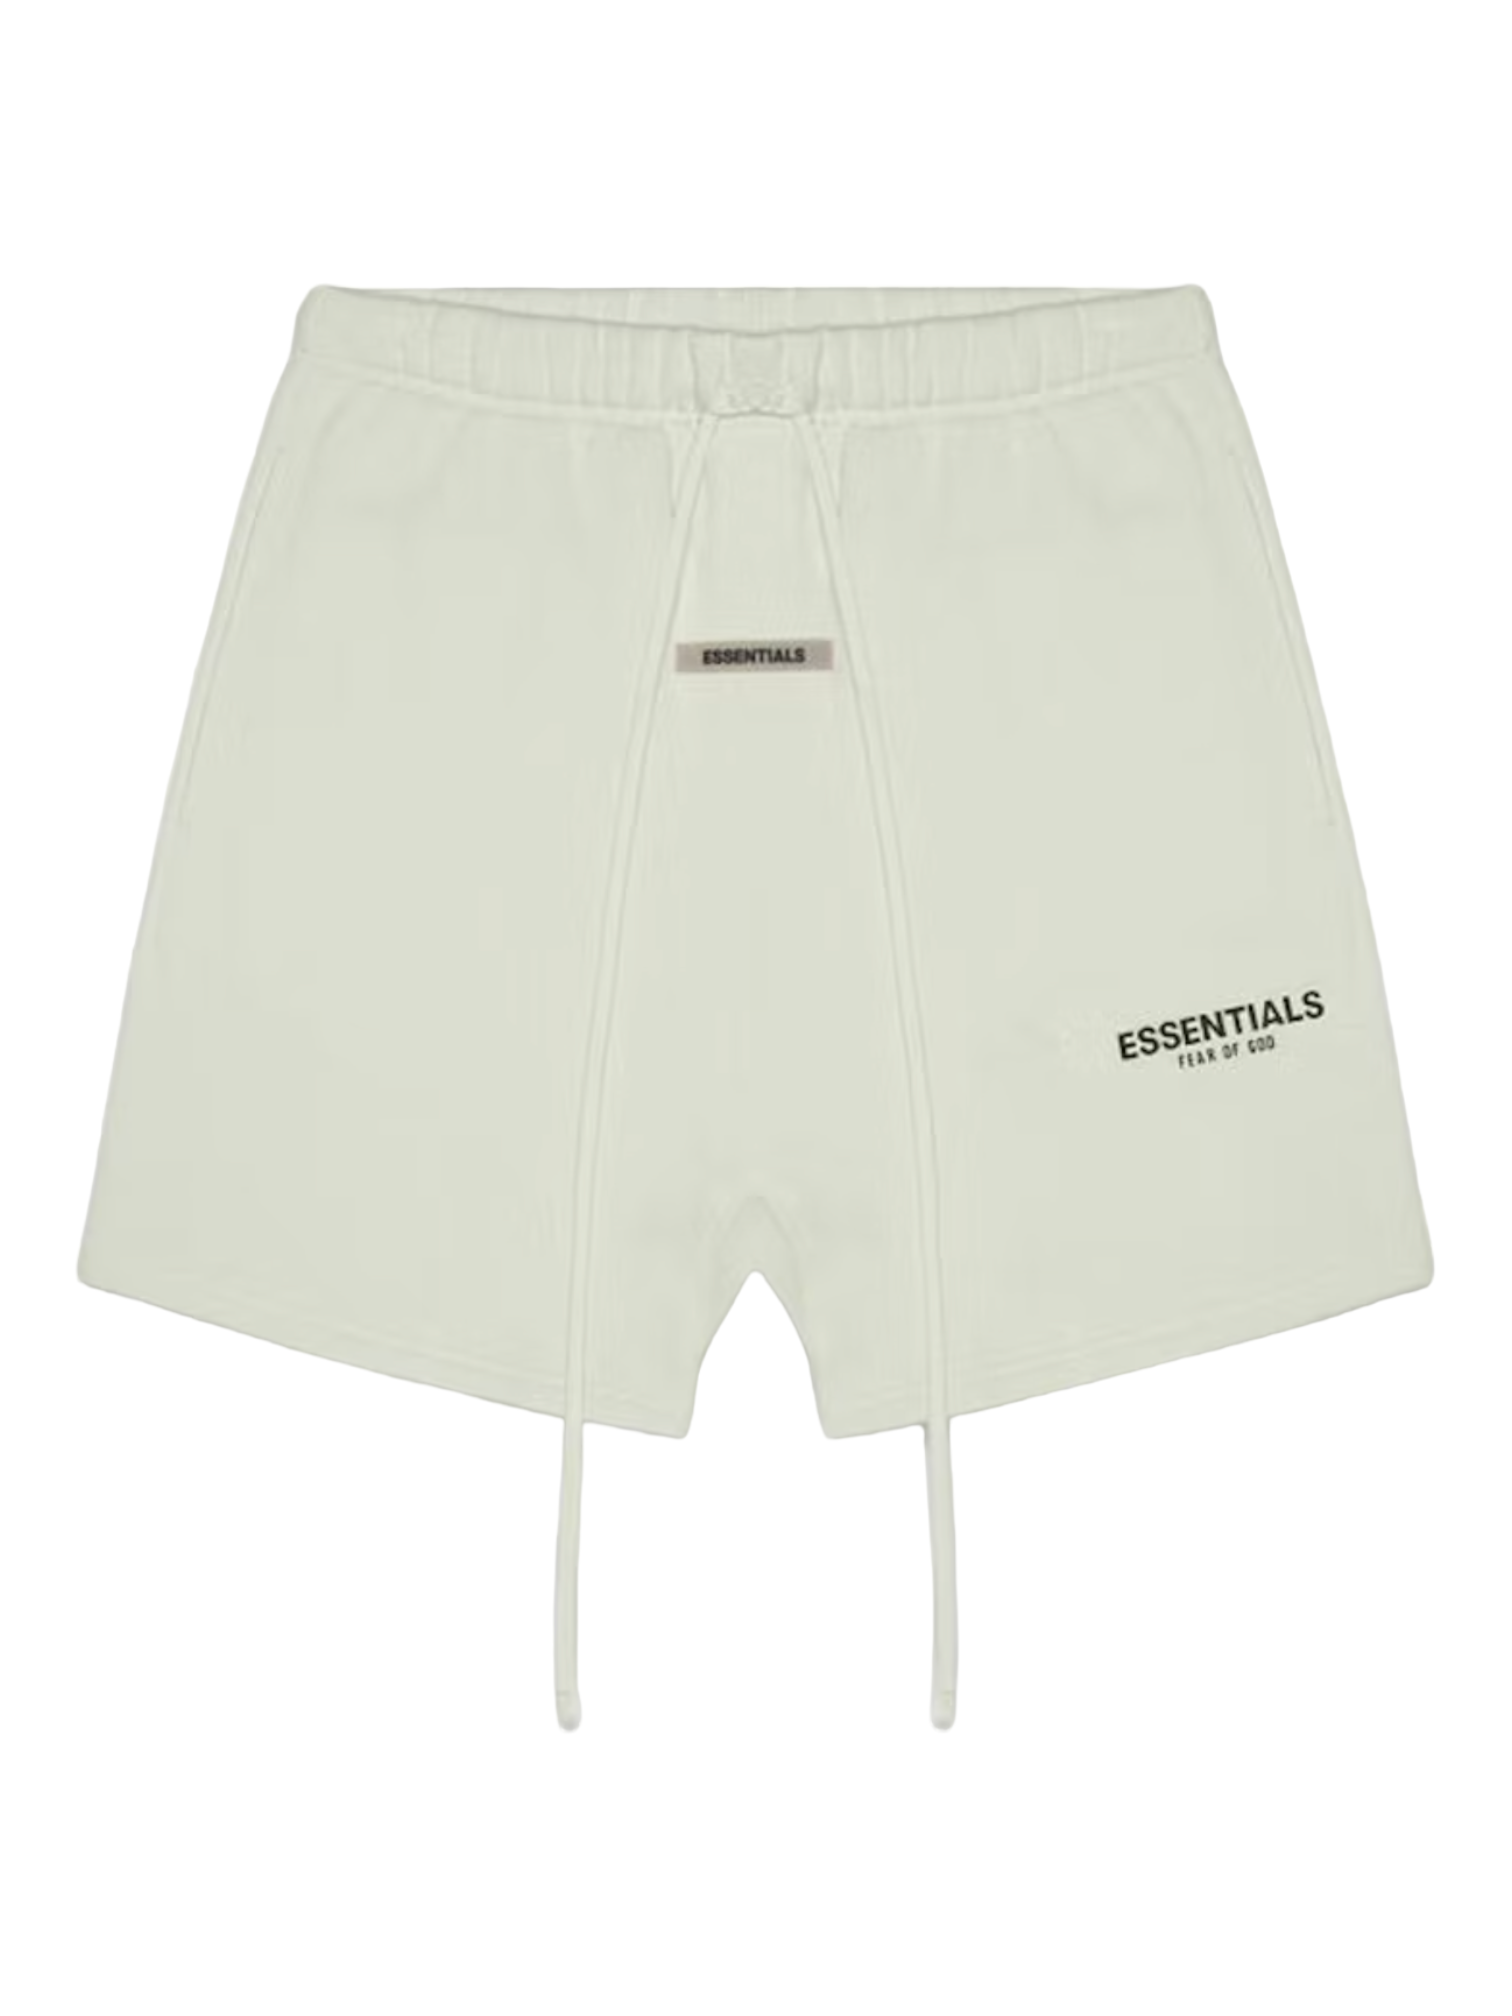 Essentials Fear of God Alfalfa Sage Fleece Shorts FW20 — Genuine Design Luxury Consignment Calgary, Alberta, Canada New and Pre-Owned Clothing, Shoes, Accessories.